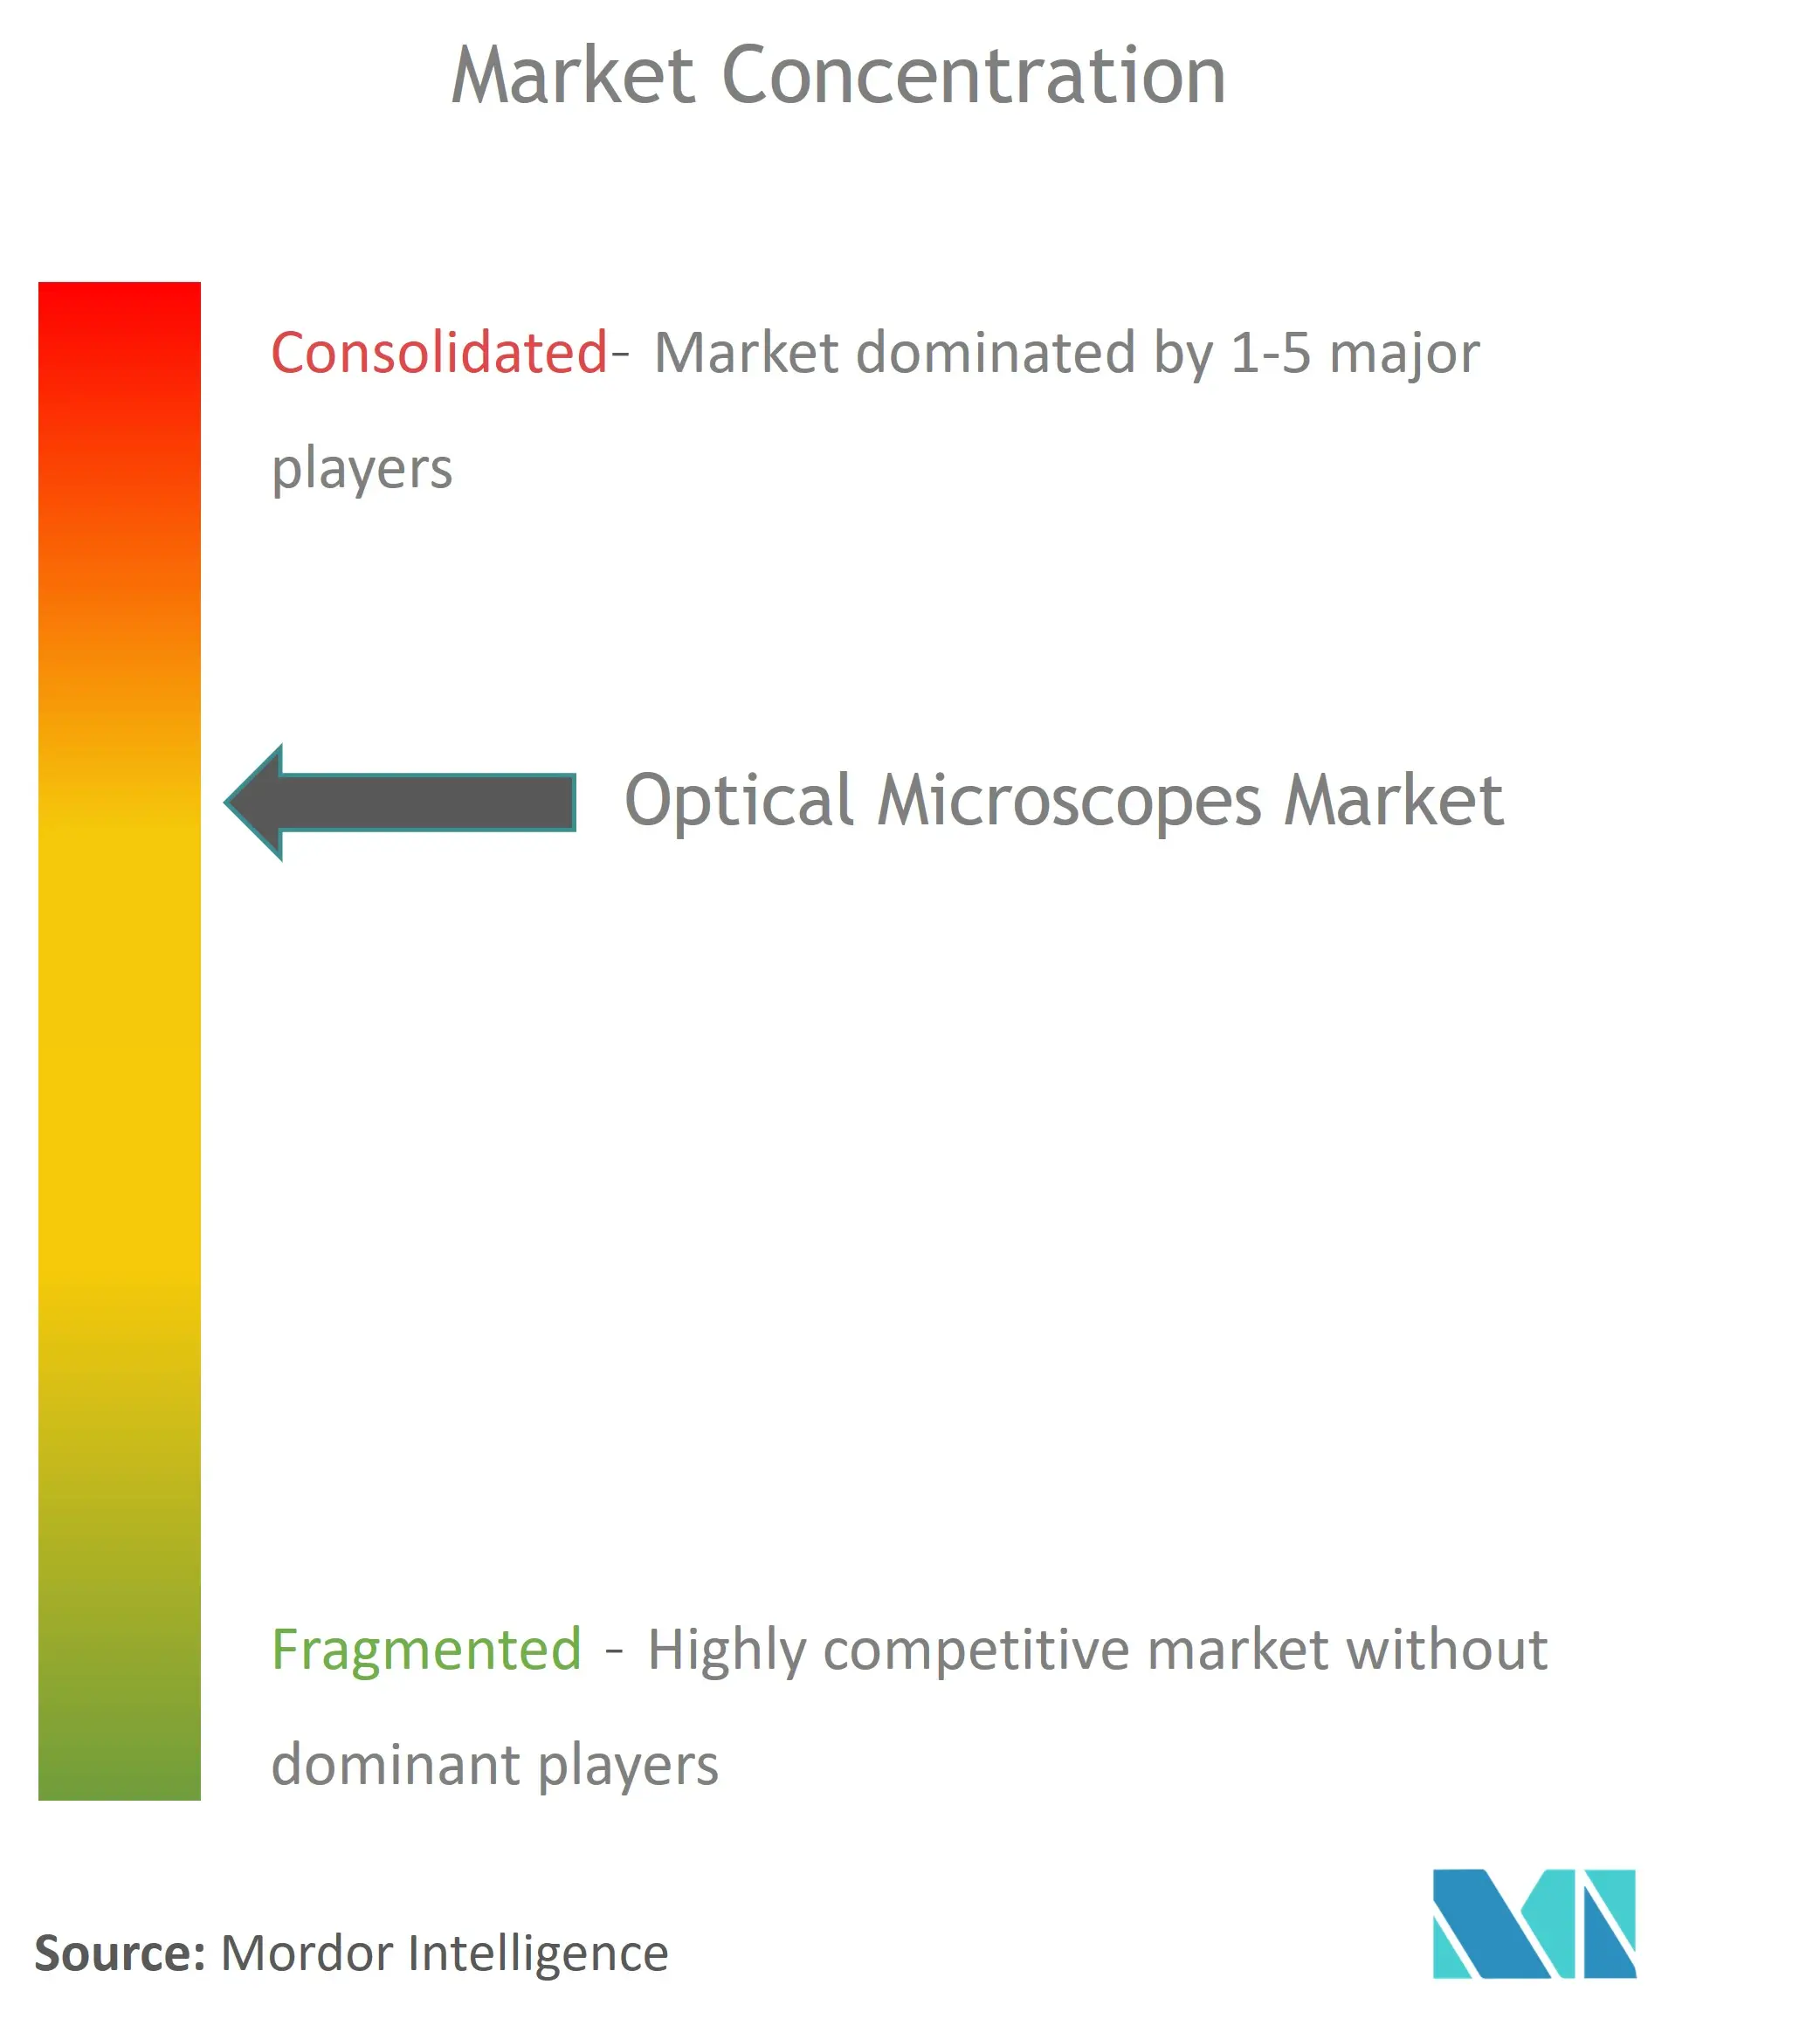 Optical Microscopes Market  Concentration